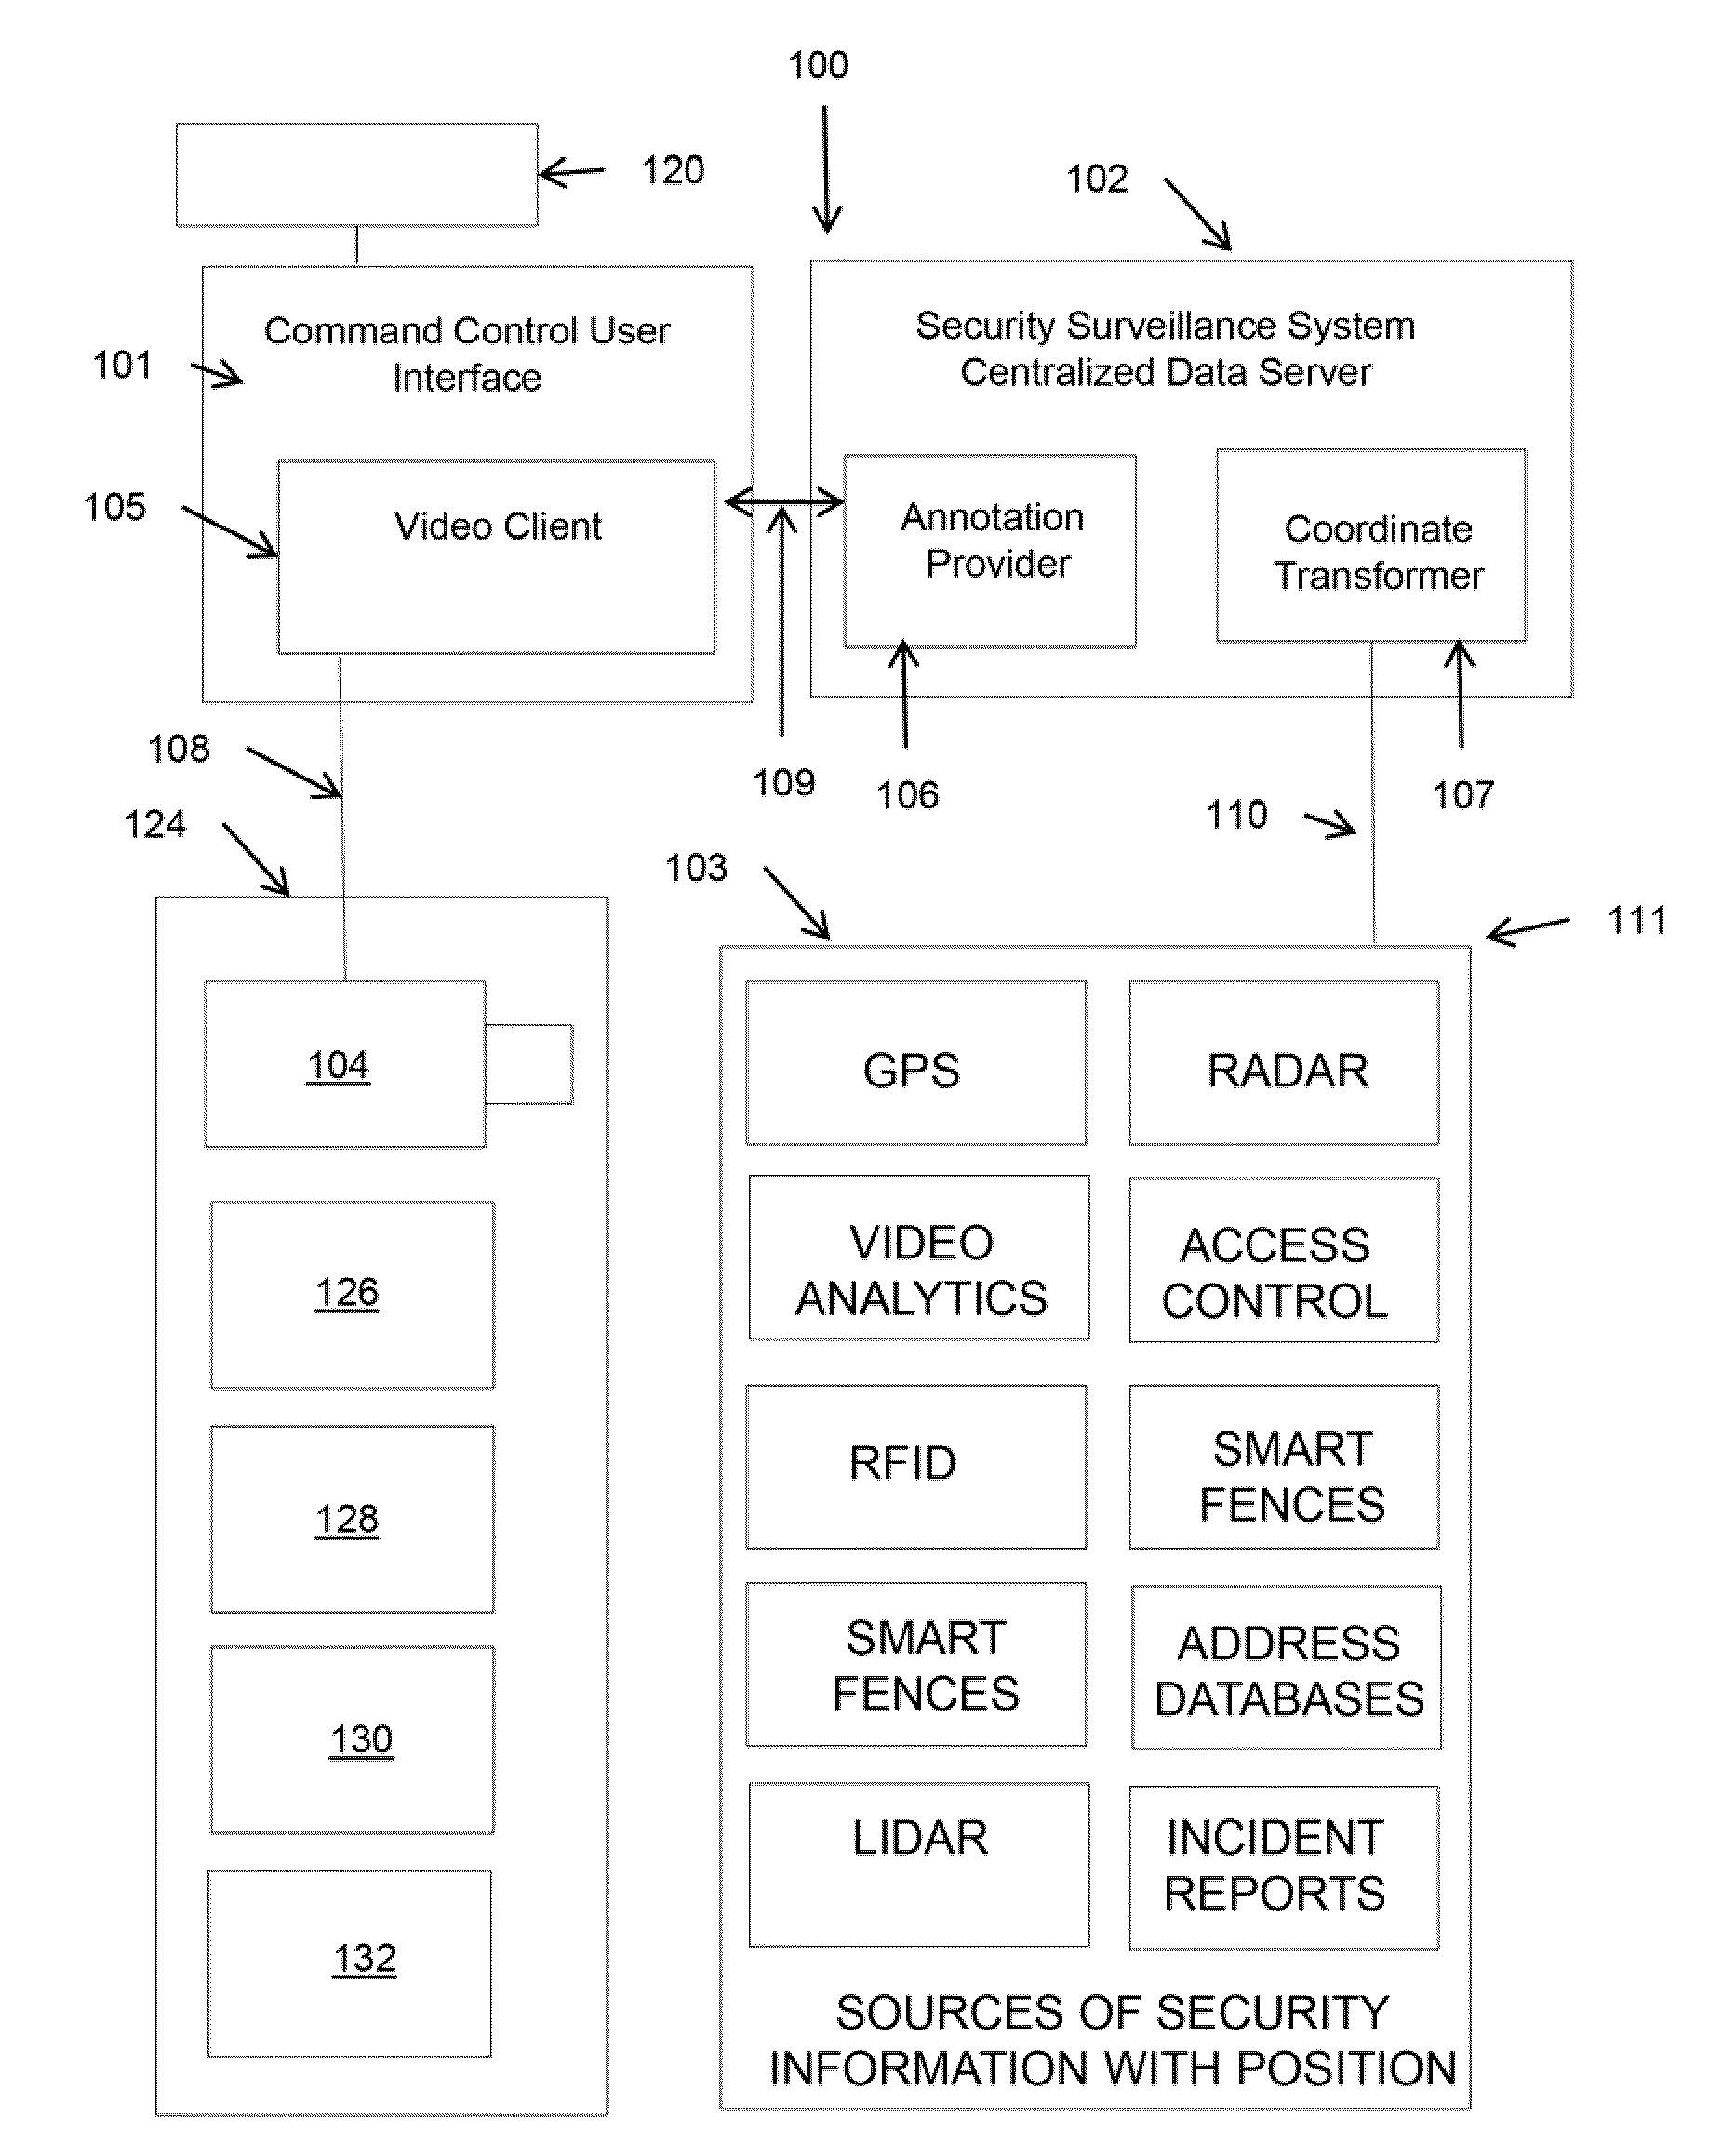 System and method for annotating video with geospatially referenced data